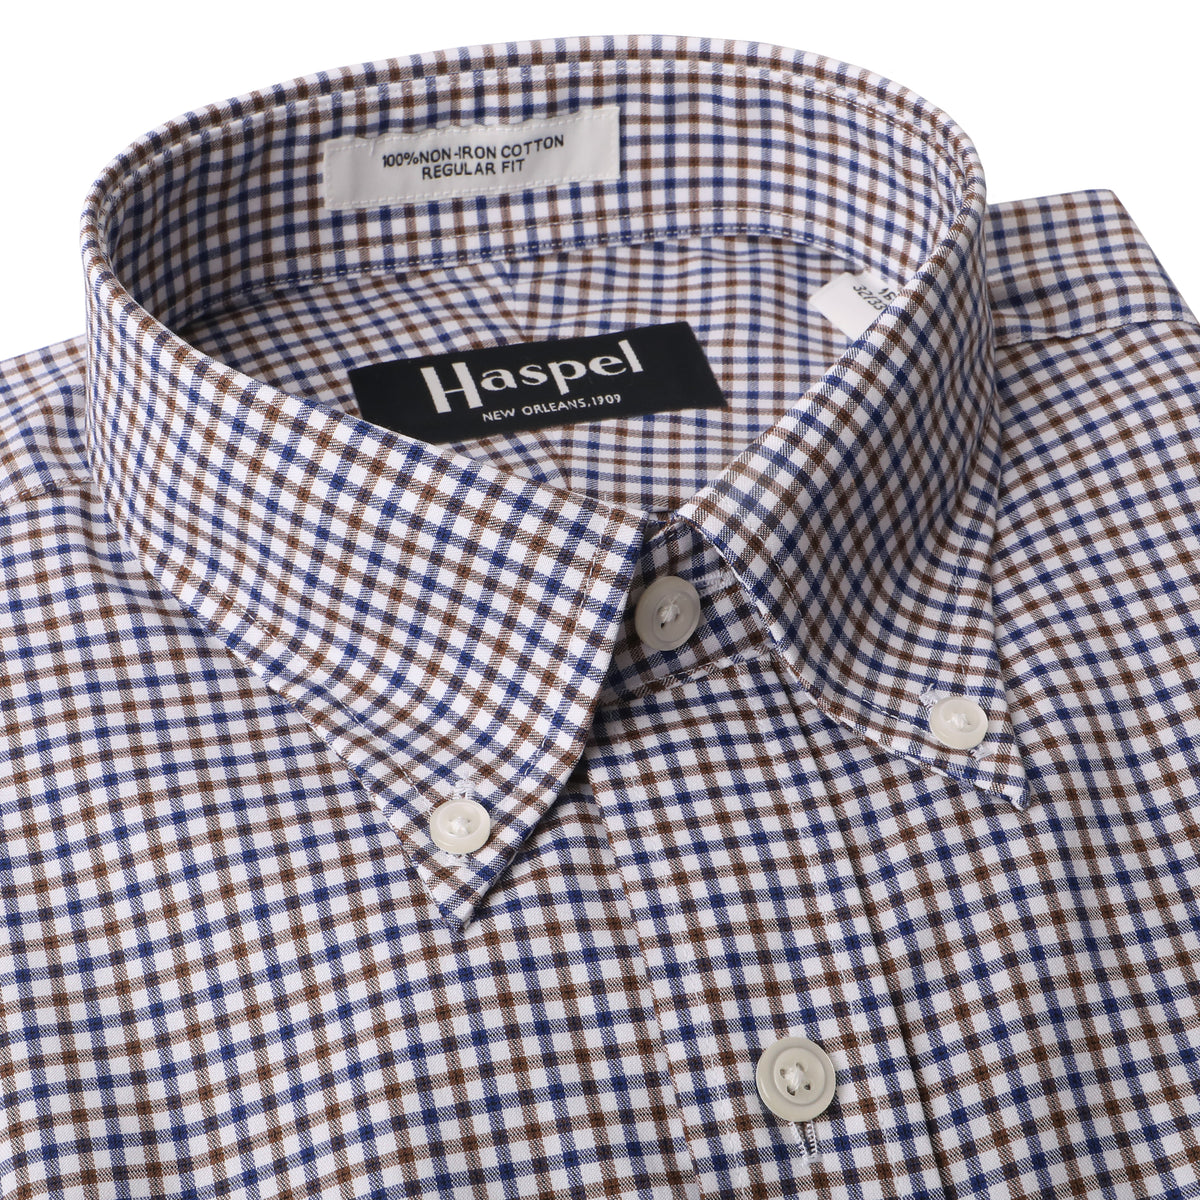 Classic men&#39;s dress shirts here that were carefully chosen to pair up with our unique, lightweight men&#39;s suits.  100% Imported Combed Cotton  •  80&#39;s 2-Ply/Non-Iron Pinpoint Fabric  •  Button Down Collar  •  Long Sleeve, Button Cuff